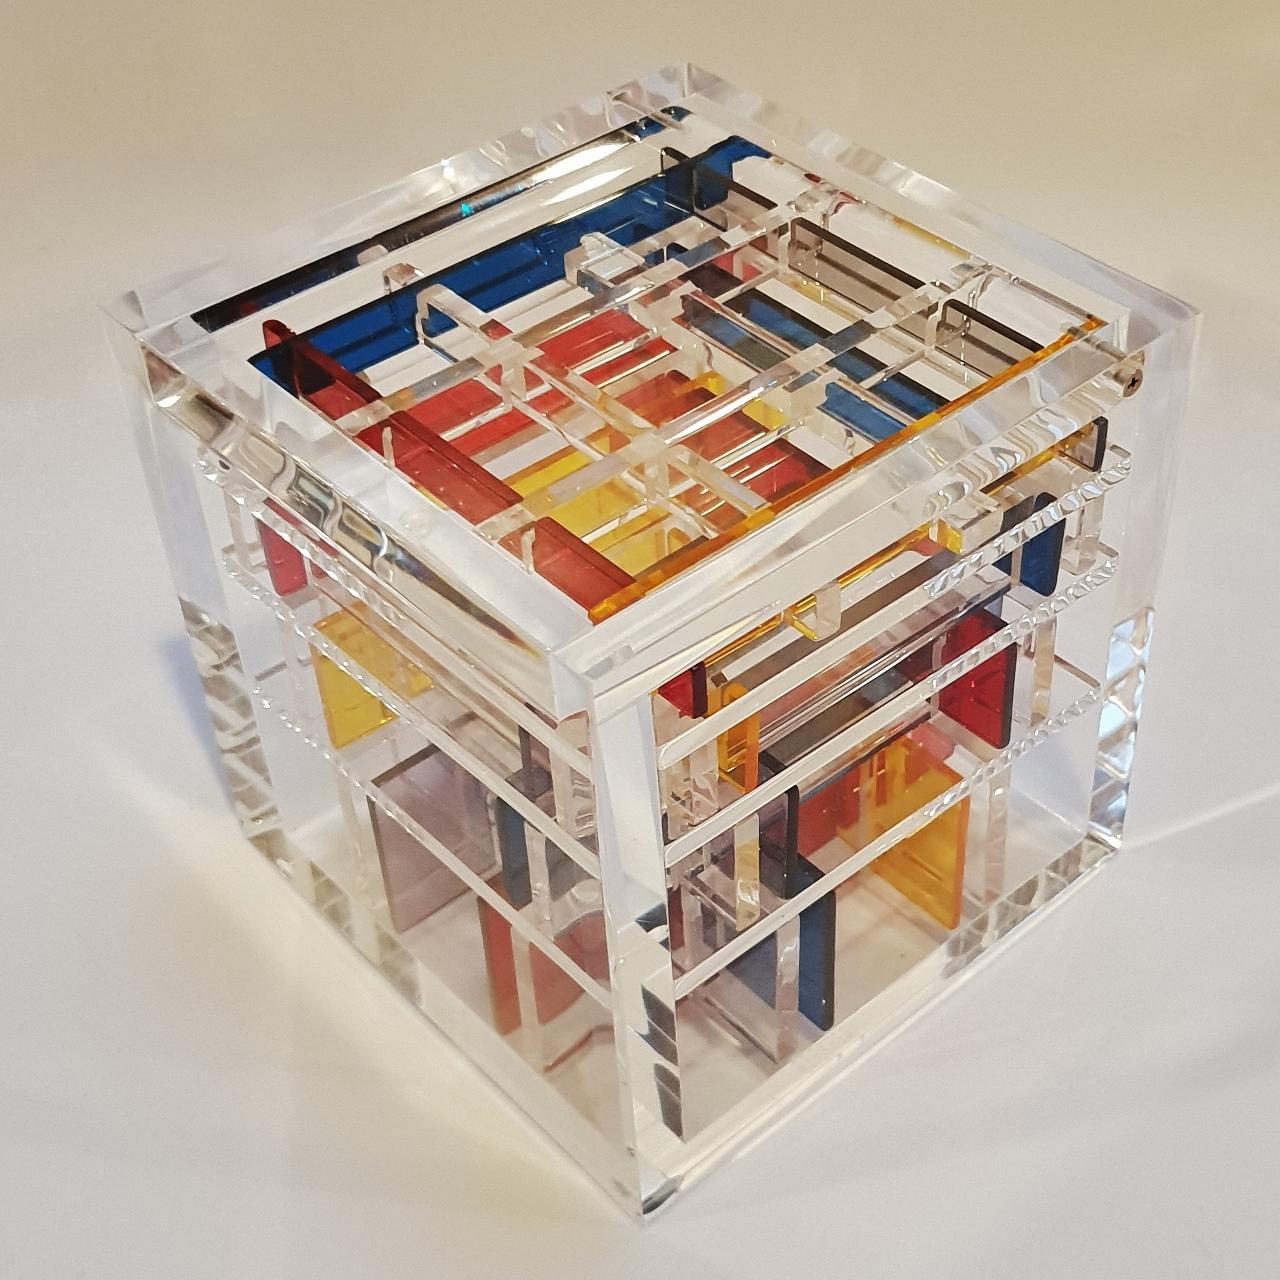 Boogie-woogie - contemporary modern abstract geometric cube sculpture